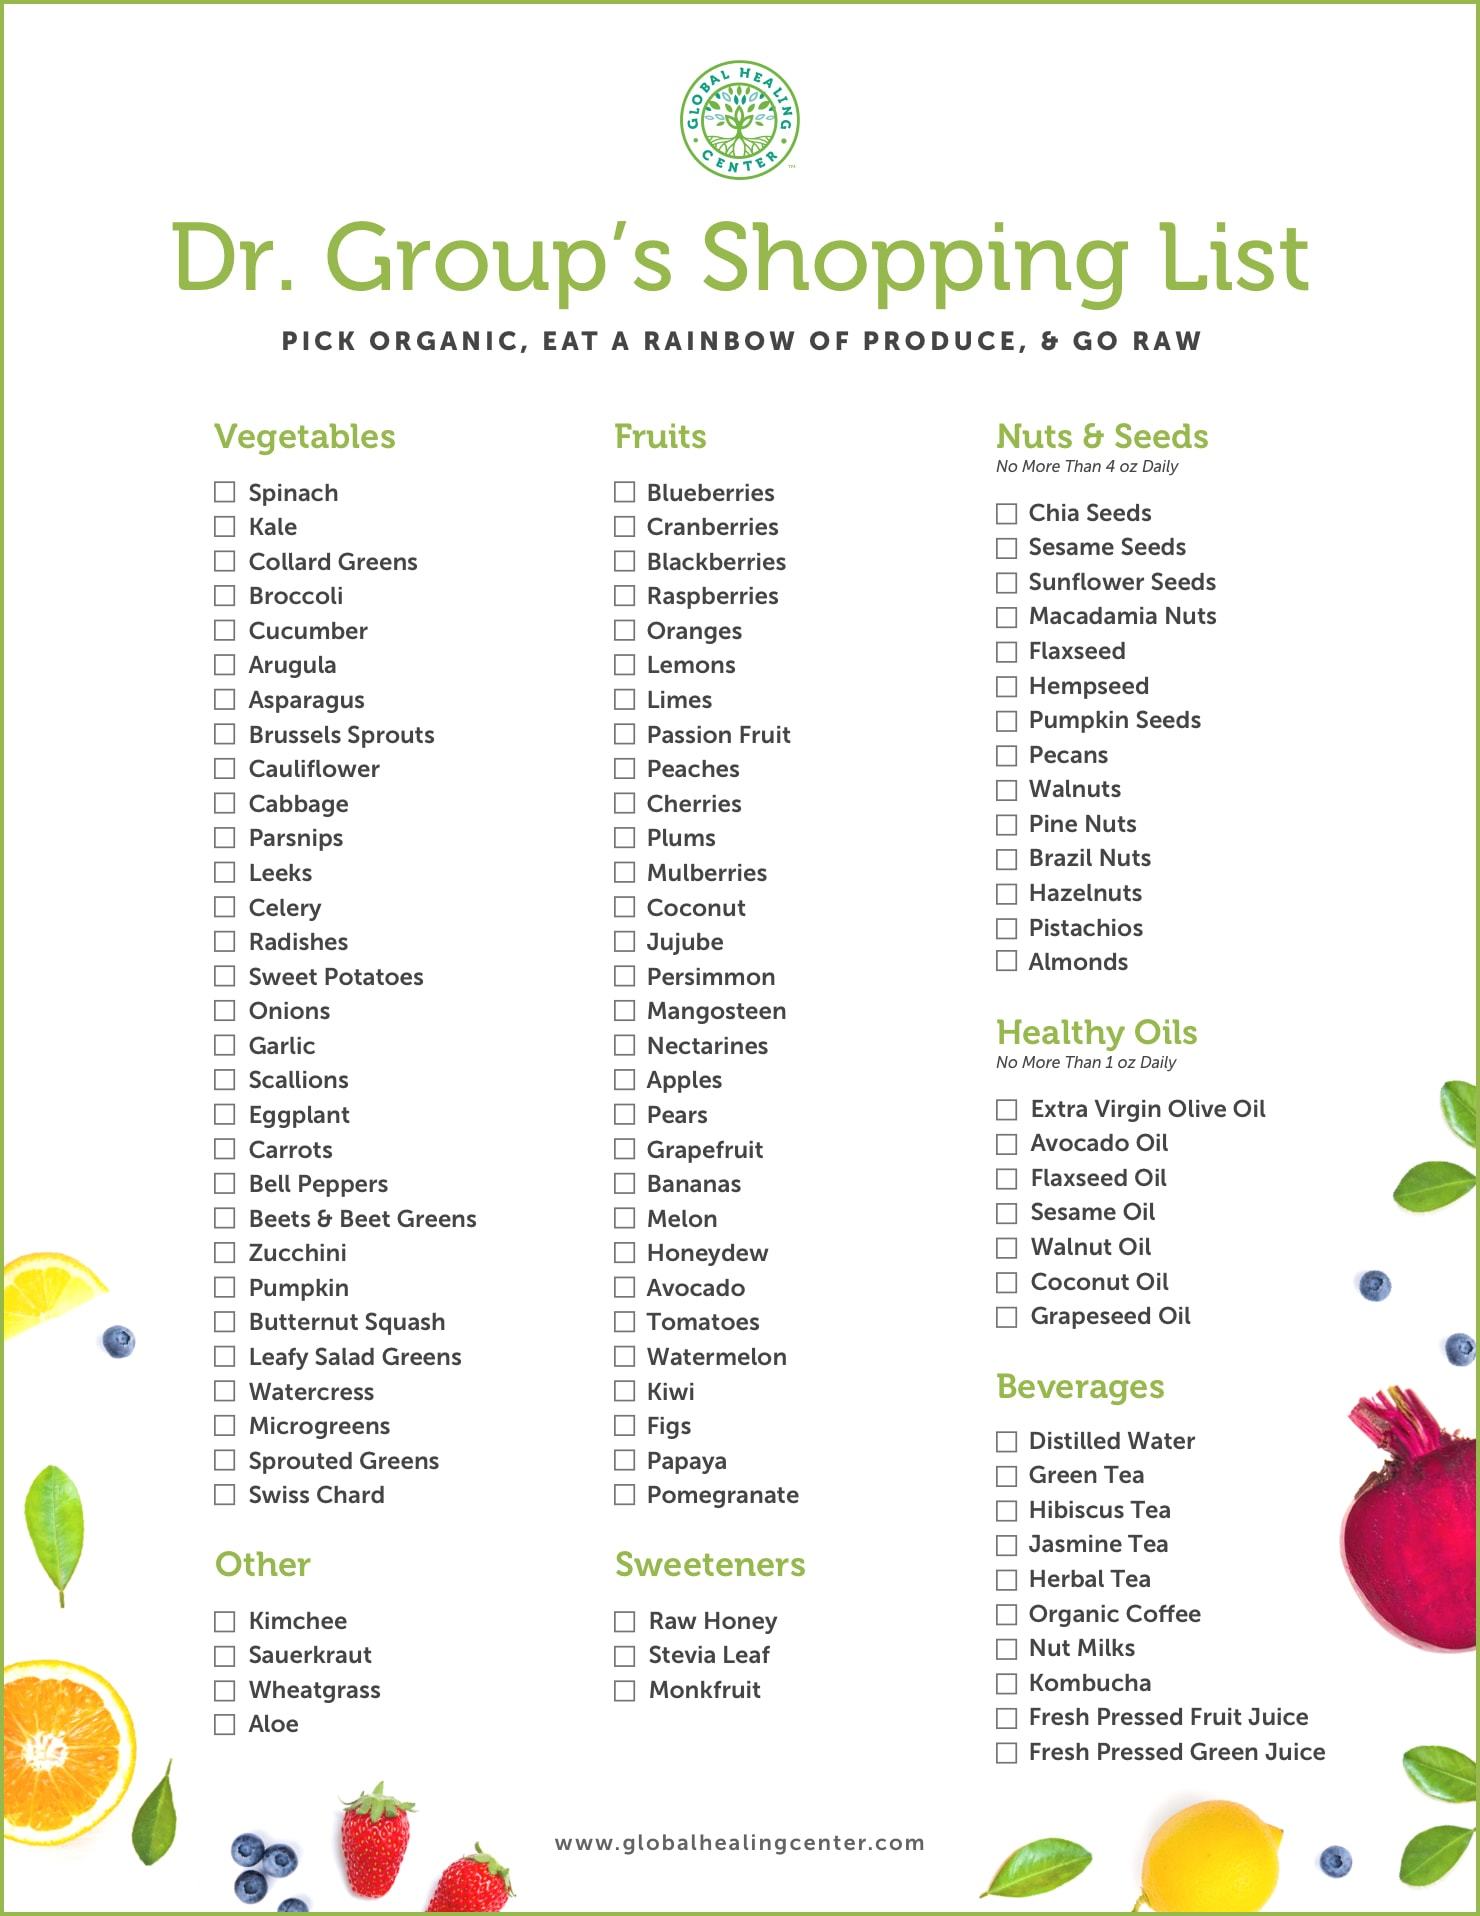 Browse through an array of Dr. Group's plant-based shopping list.